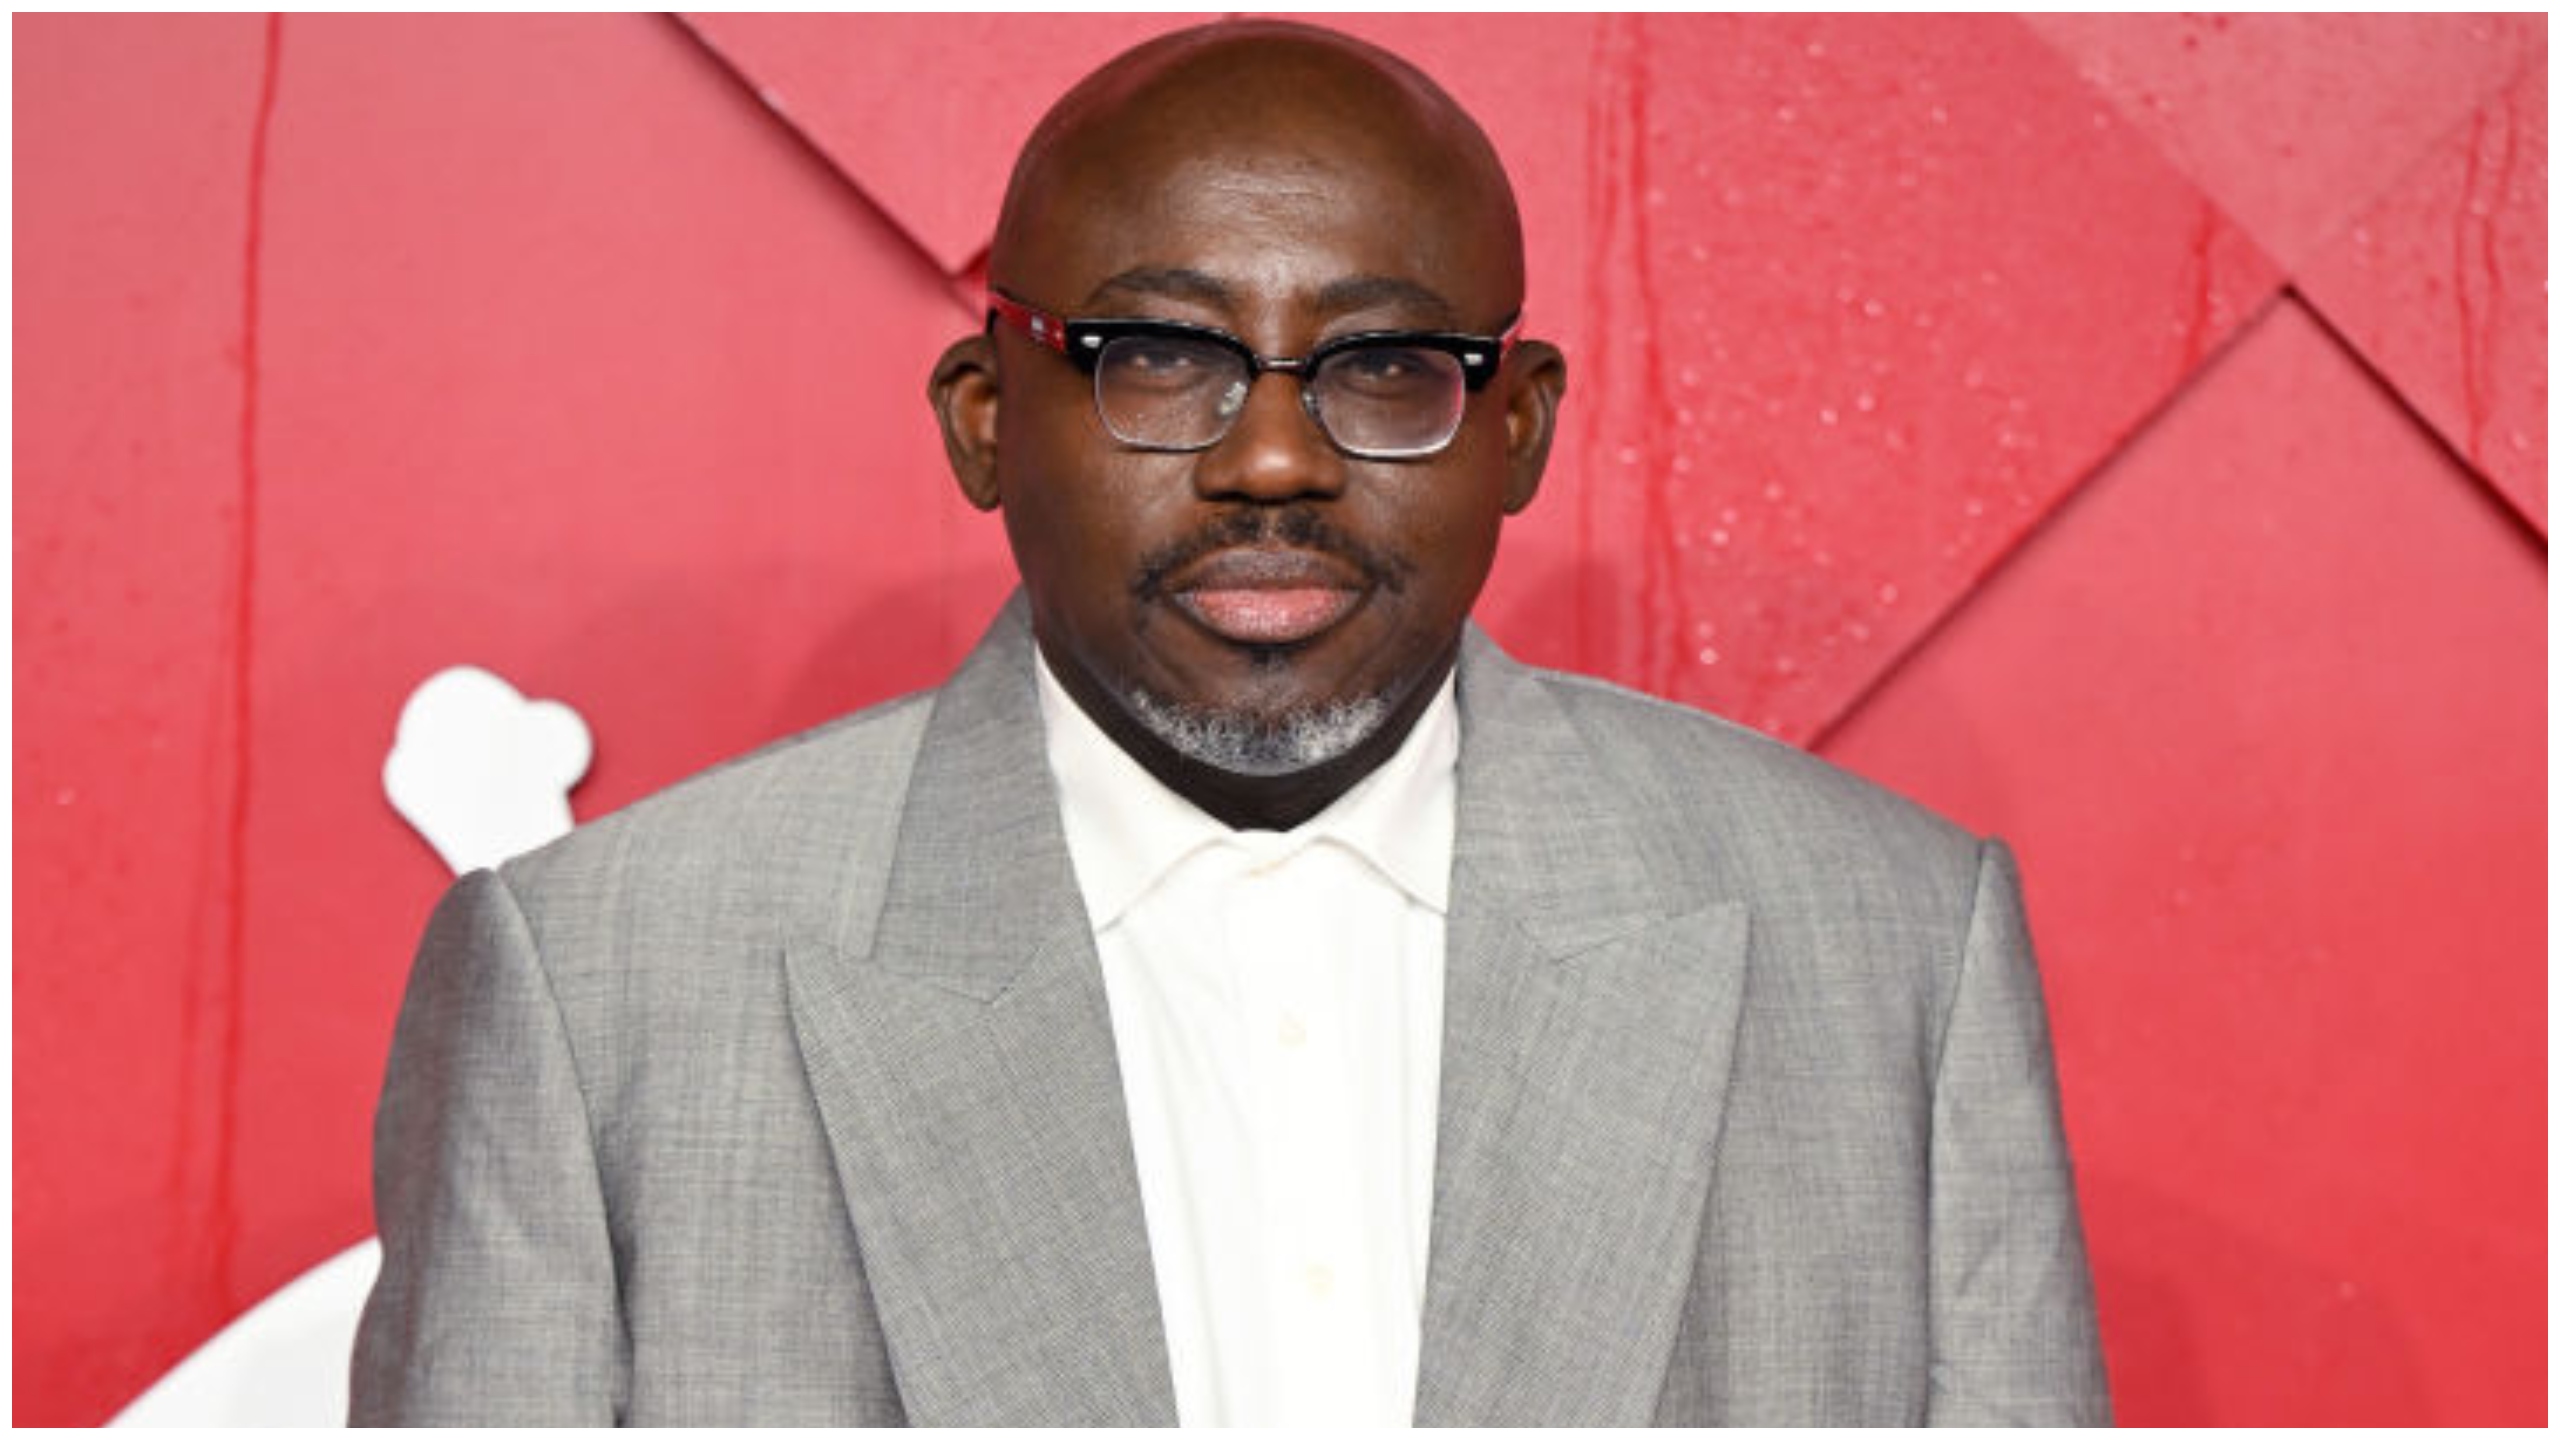 The Breathtaking Story Of Edward Enninful The First Black Man To Head The Publication Of The Famous British Vogue